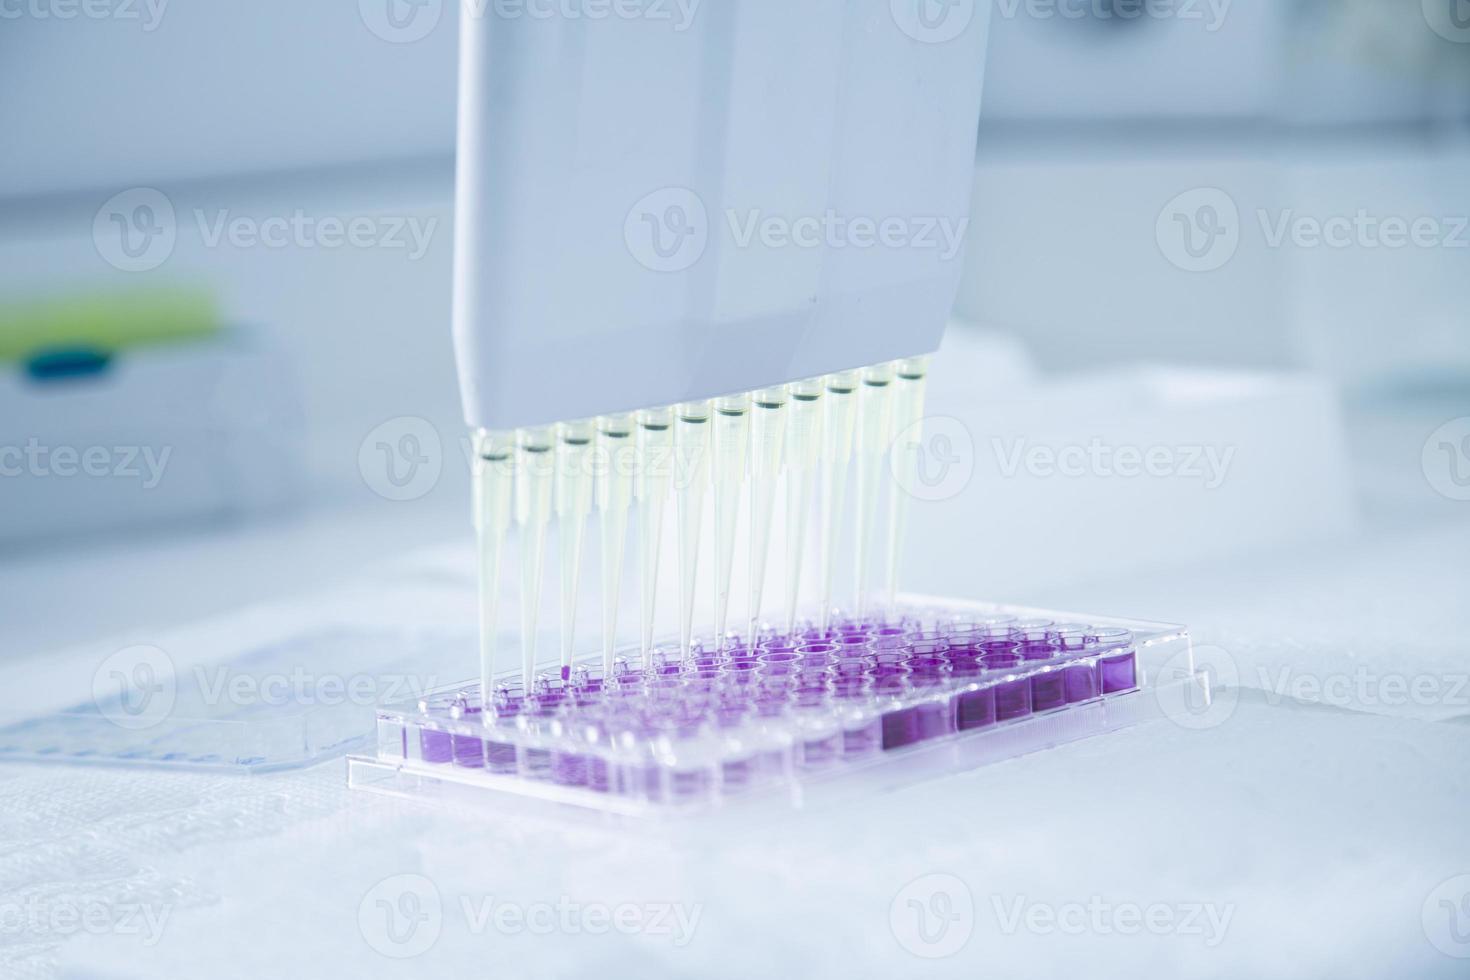 cell culture at the medicine, medical and cell culture laboratory photo